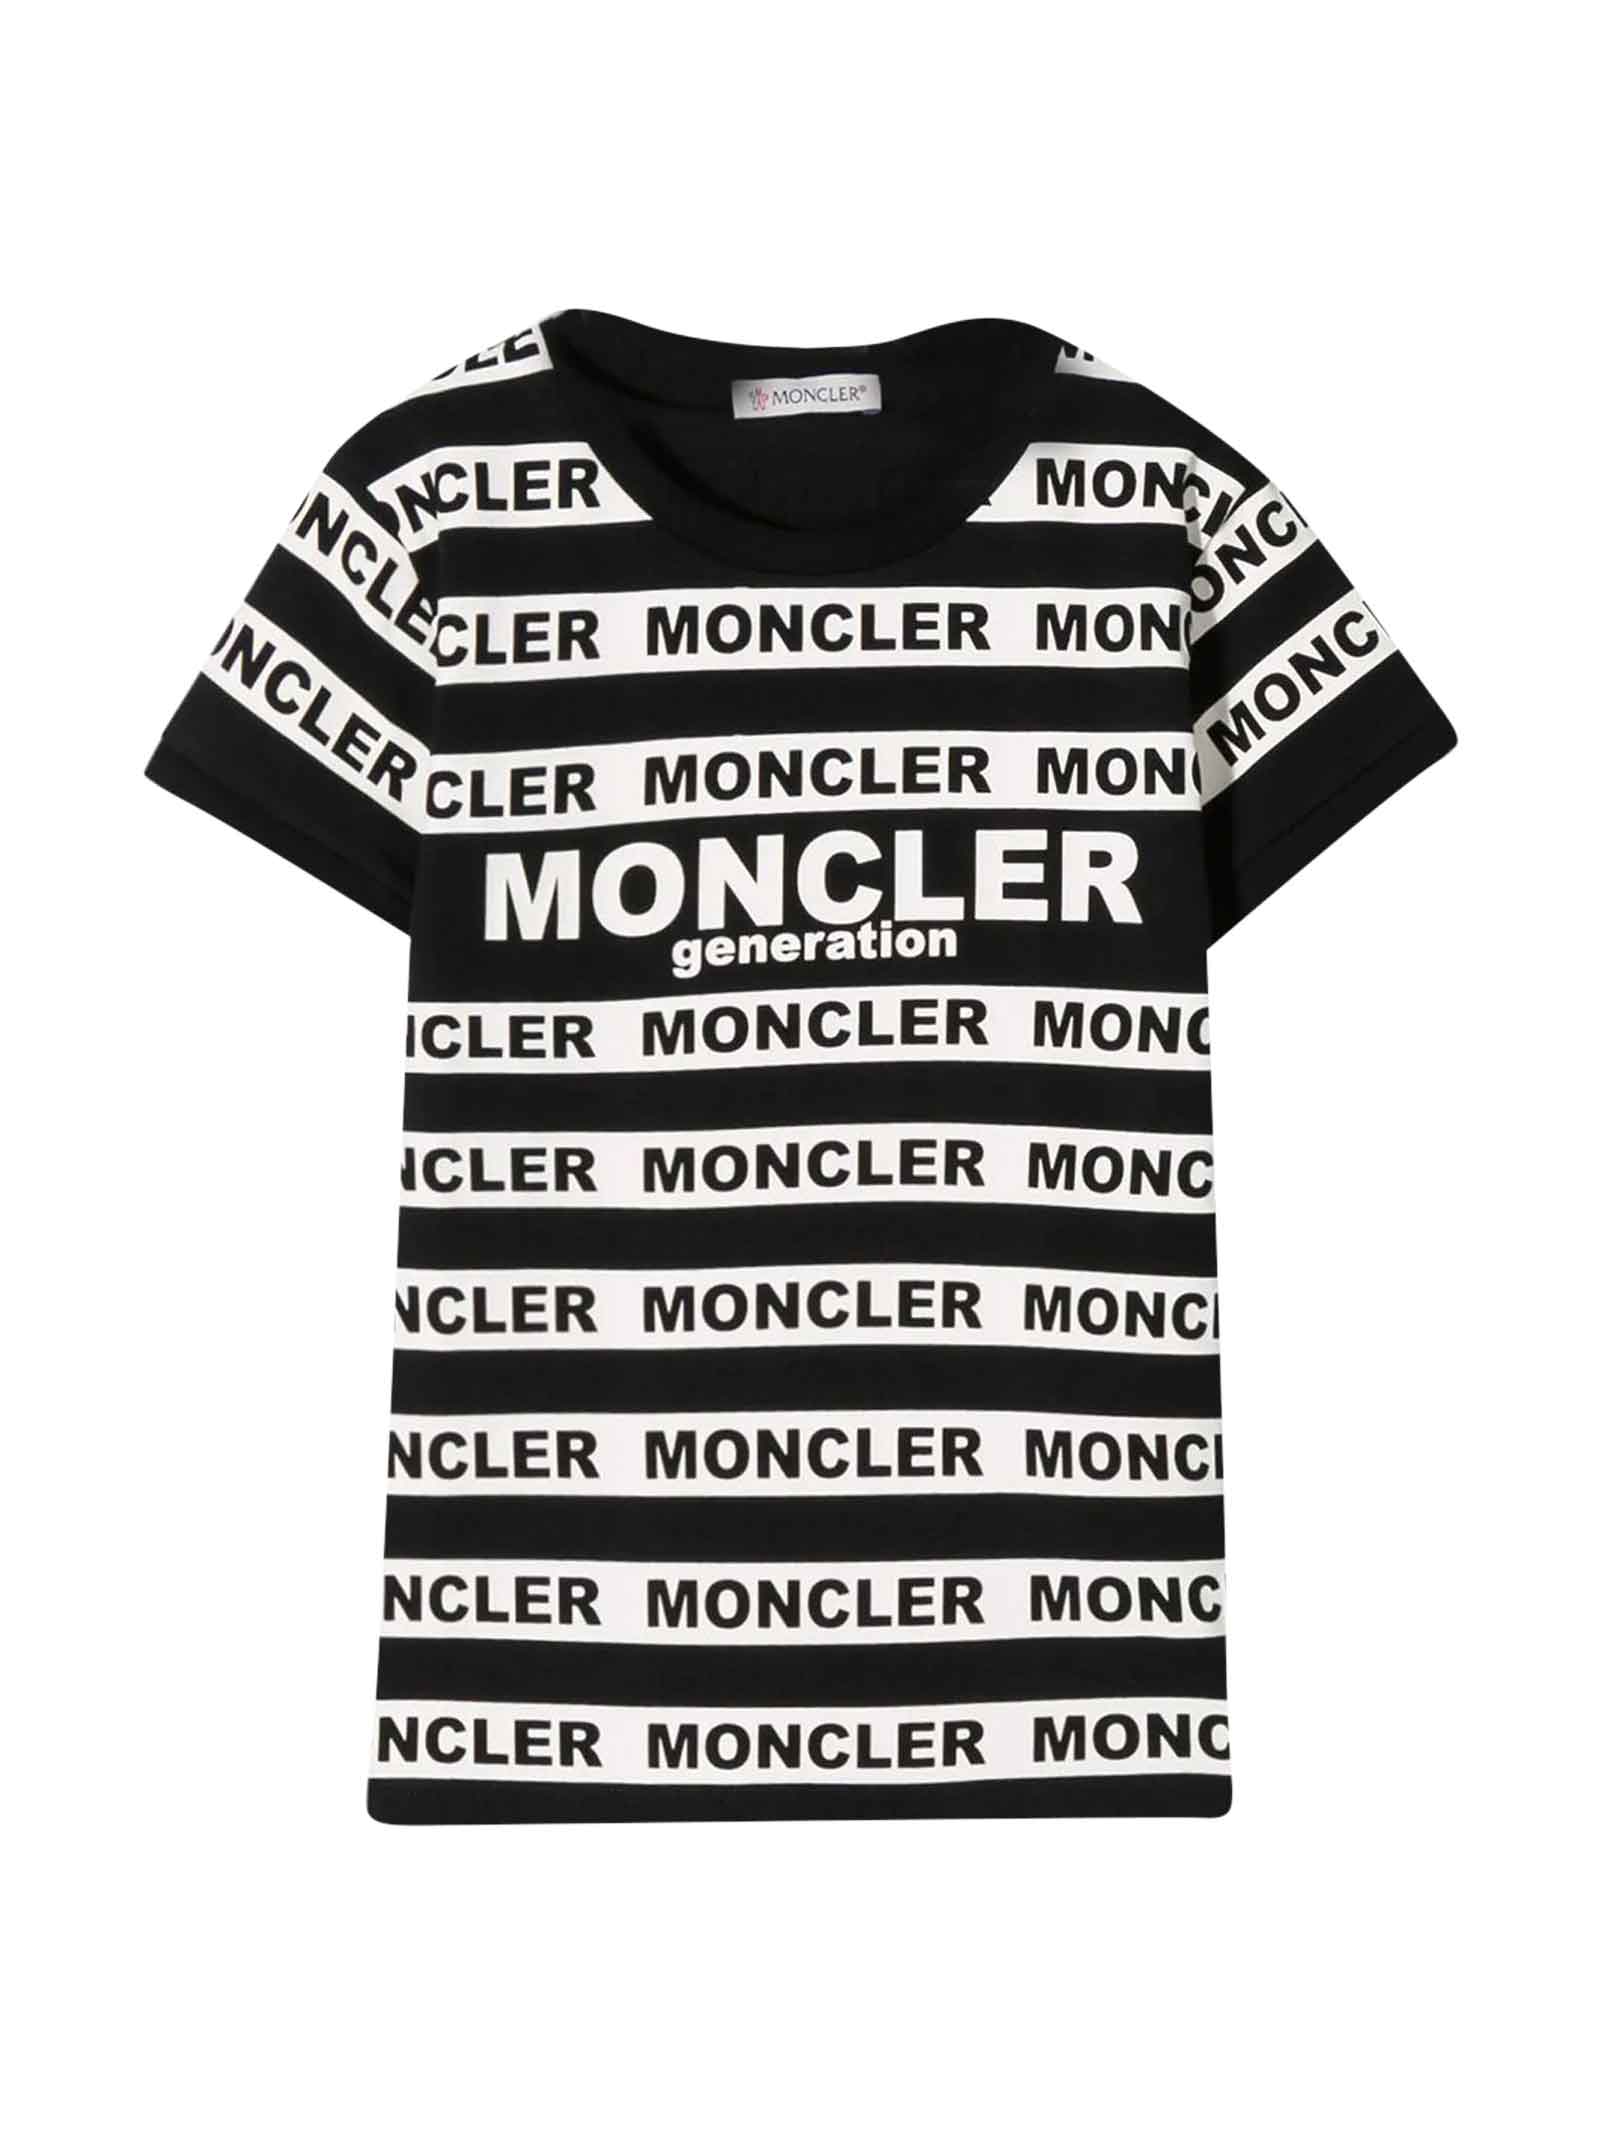 MONCLER BLACK AND WHITE T-SHIRT WITH LOGO BANDS,11277715